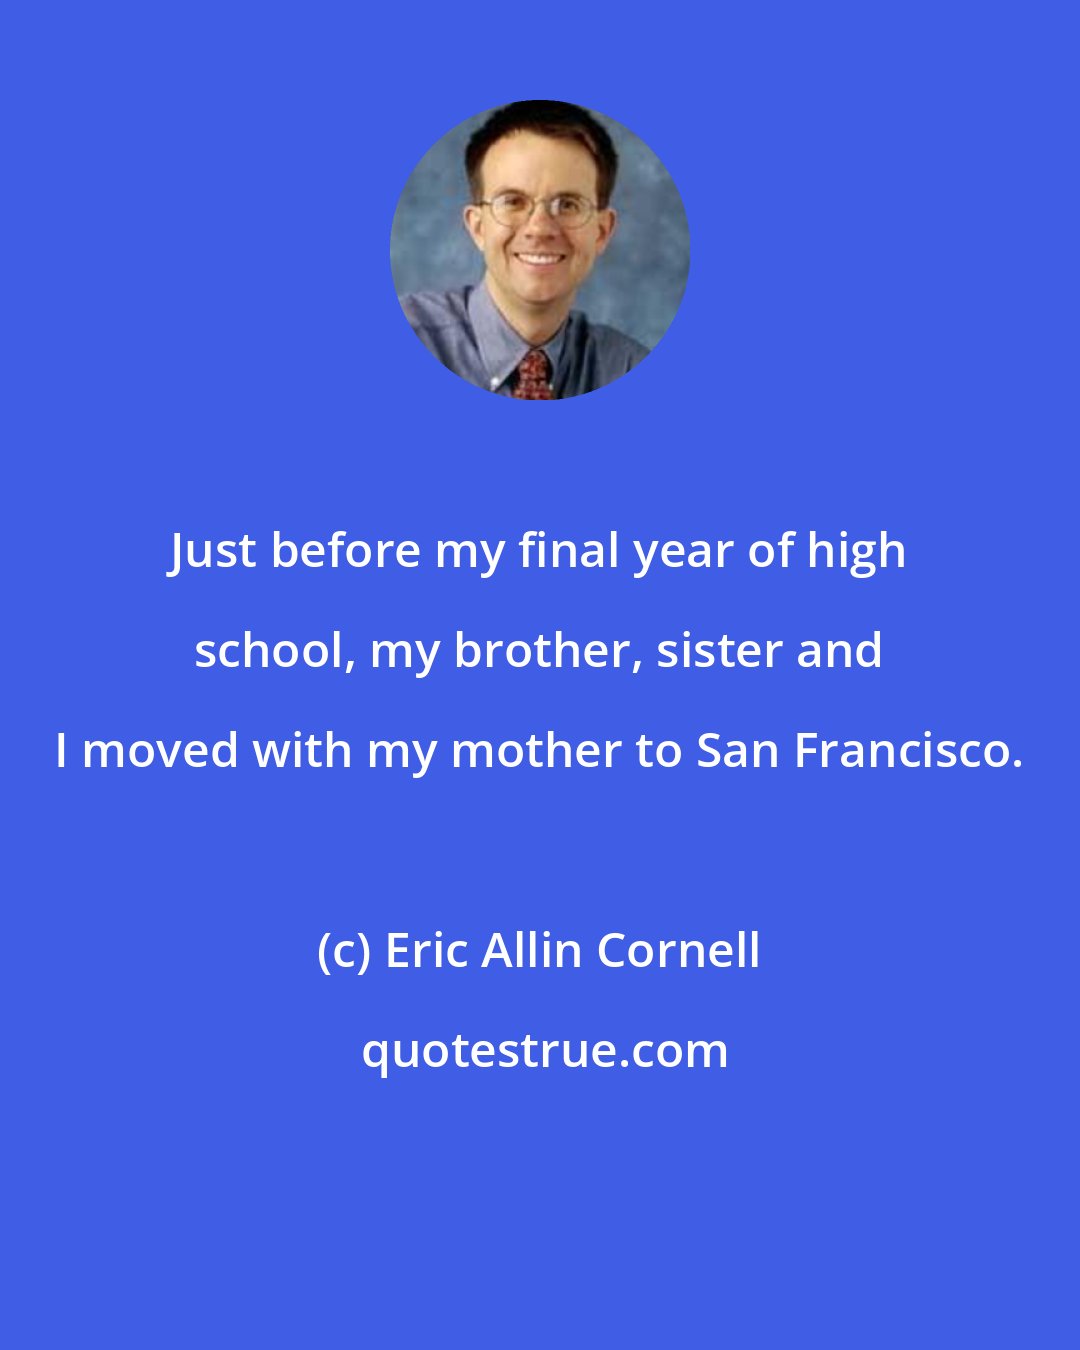 Eric Allin Cornell: Just before my final year of high school, my brother, sister and I moved with my mother to San Francisco.